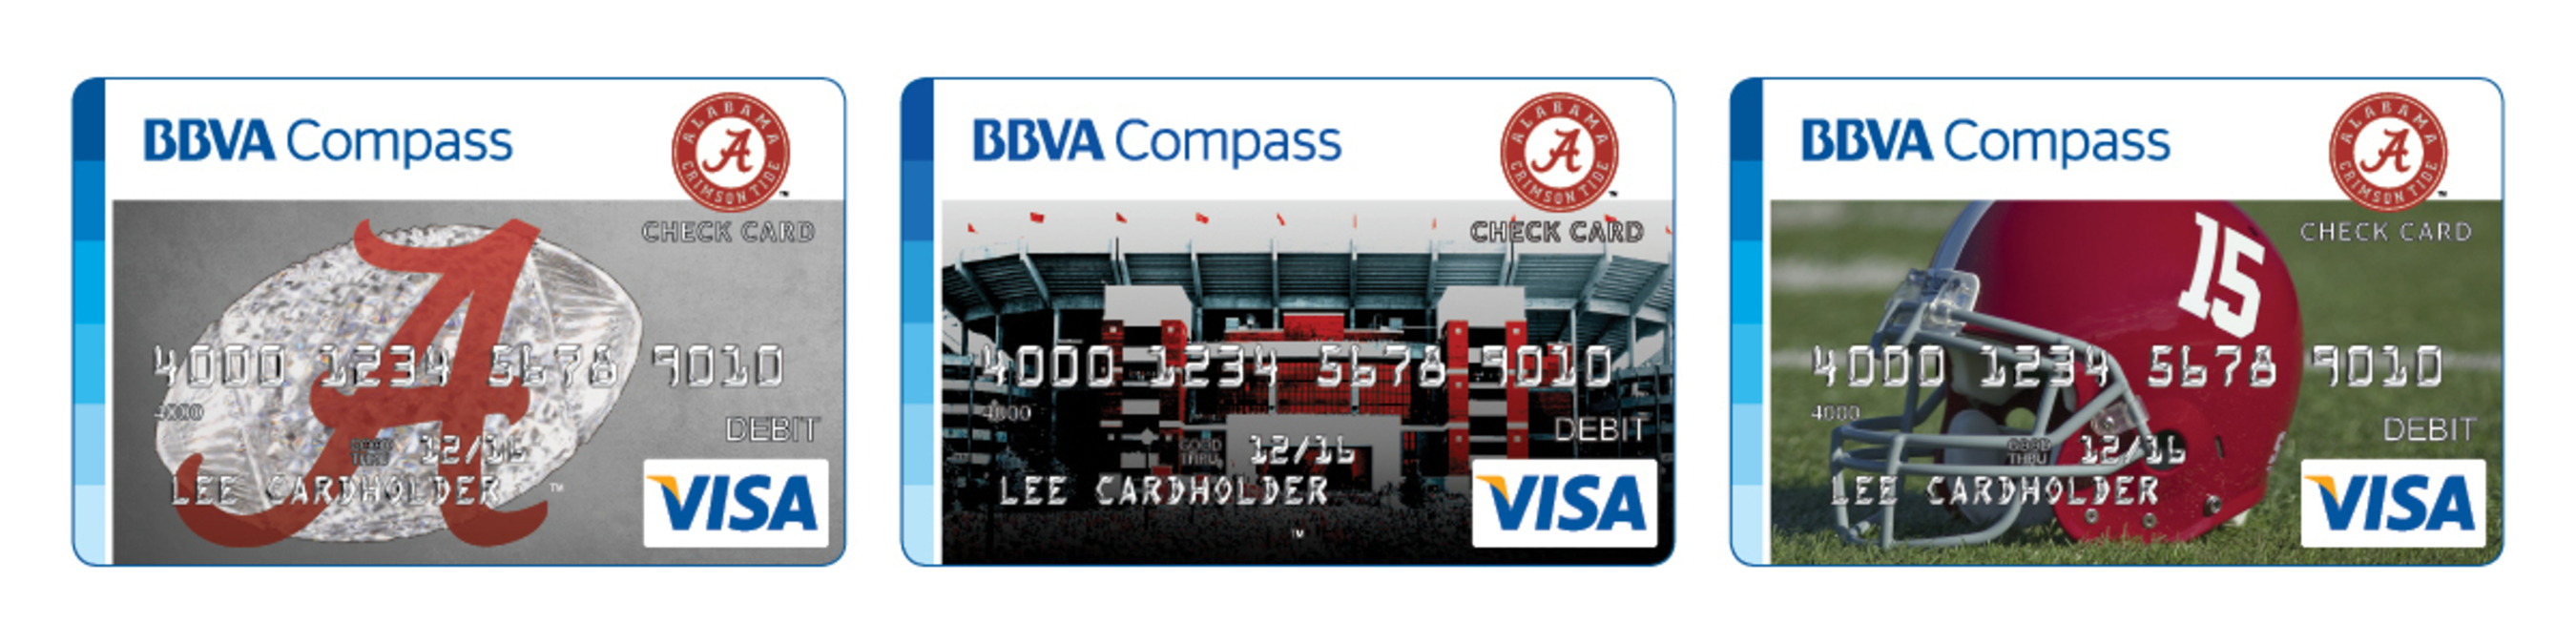 Featuring Bama Checking, Bama Savings and team-branded online and mobile banking services, BBVA Compass’ Bama Banking gives enthusiastic fans another way to show their unwavering support for the University of Alabama. (PRNewsFoto/BBVA Compass)